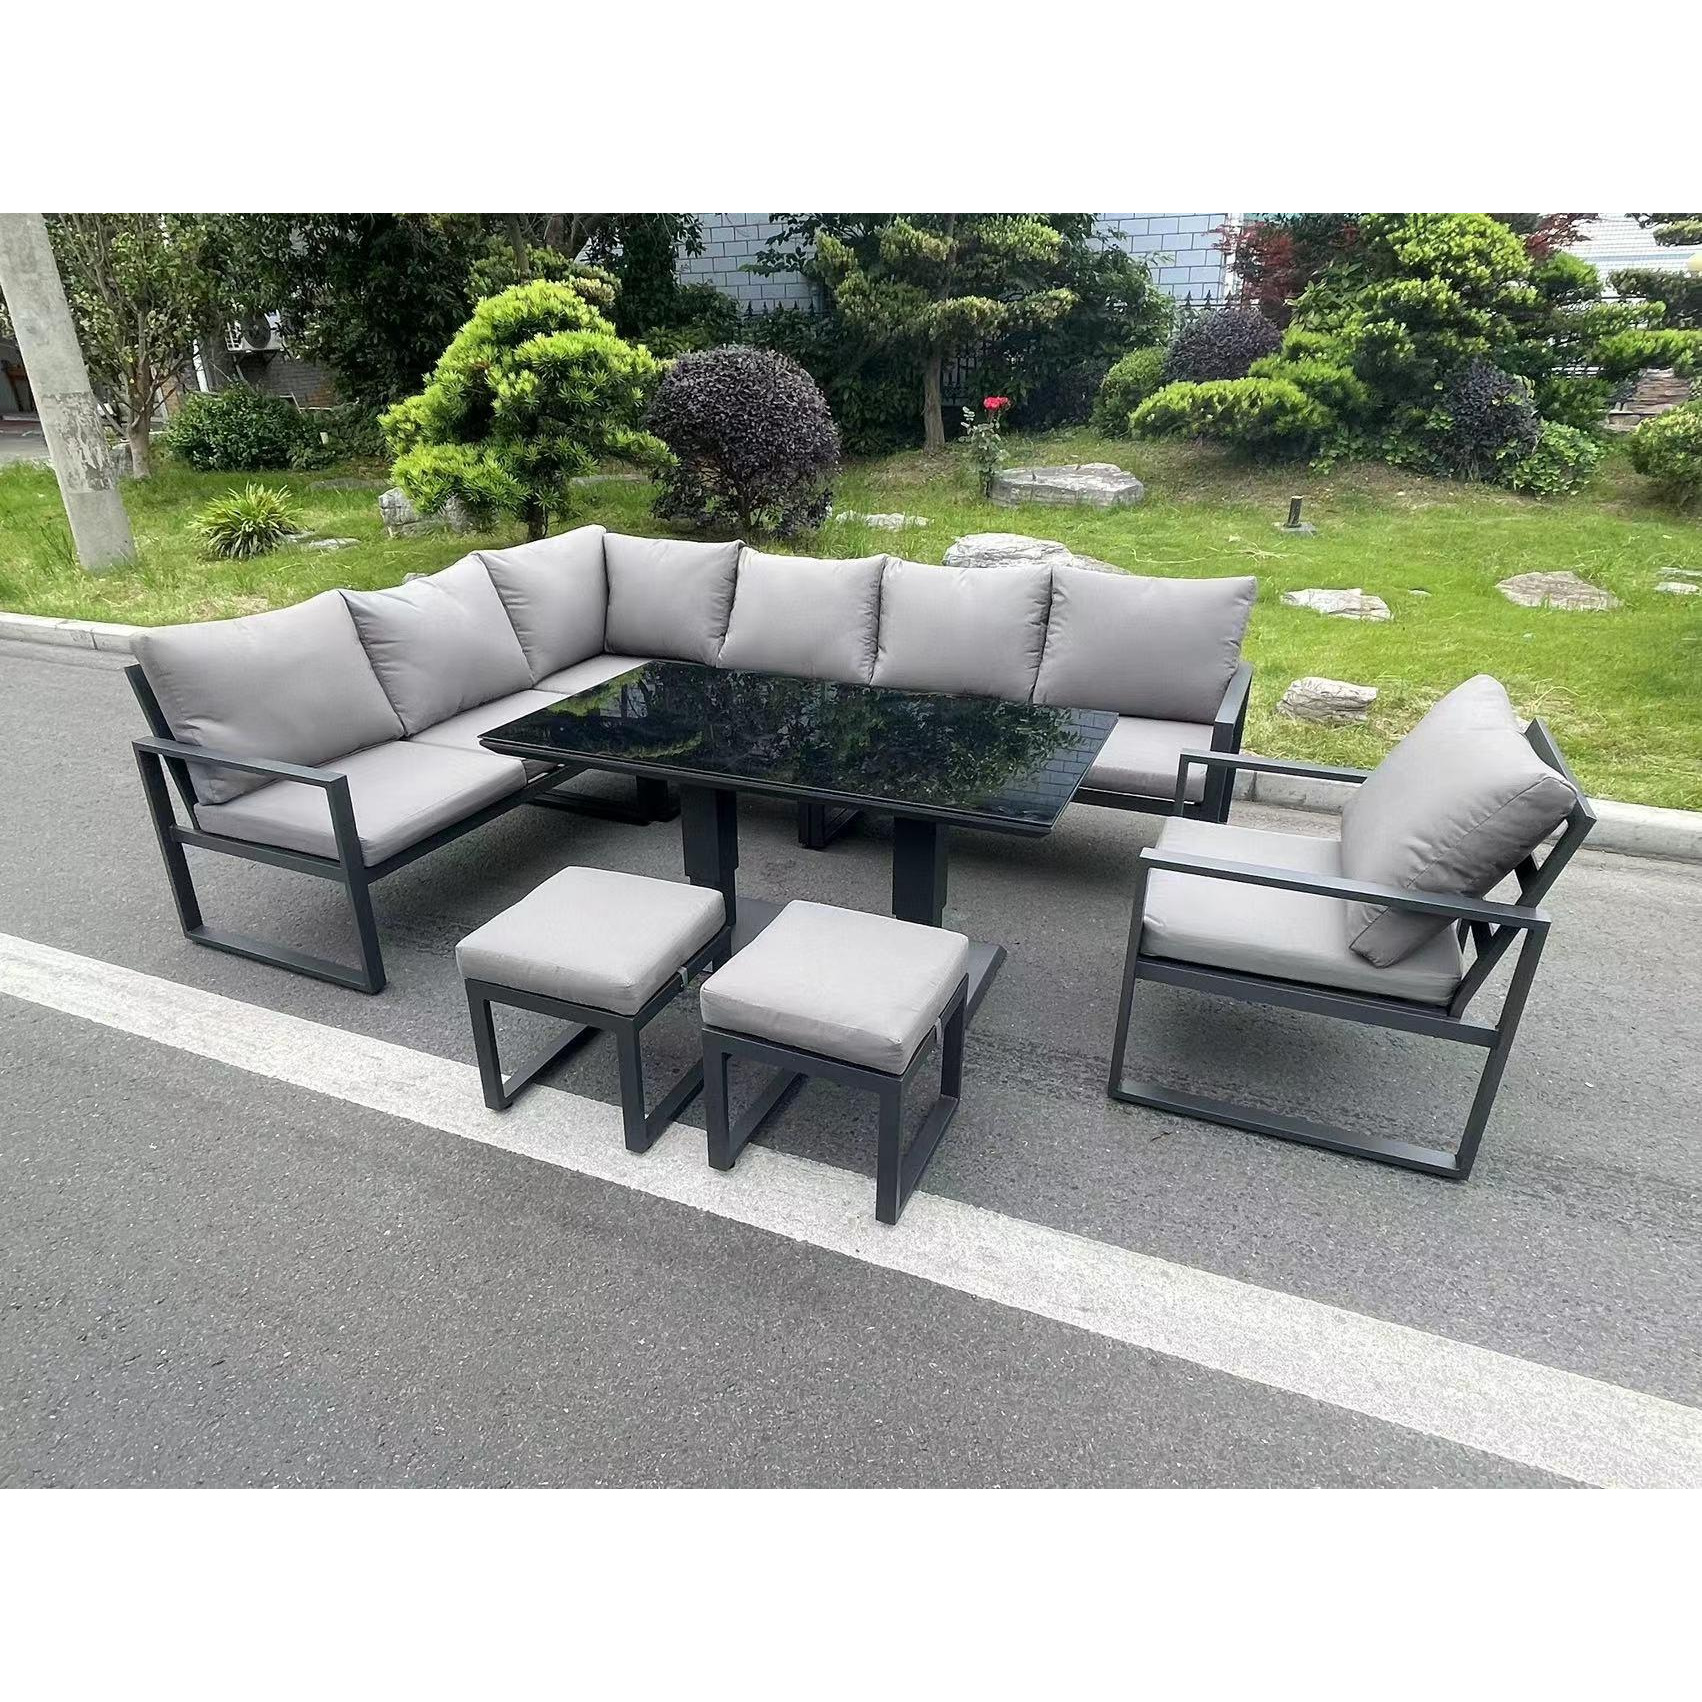 Aluminum Outdoor Garden Furniture Corner Sofa Chair Footstools Adjustable Rising Lifting Dining Table Sets Black Tempered Glass 9 Seater - image 1